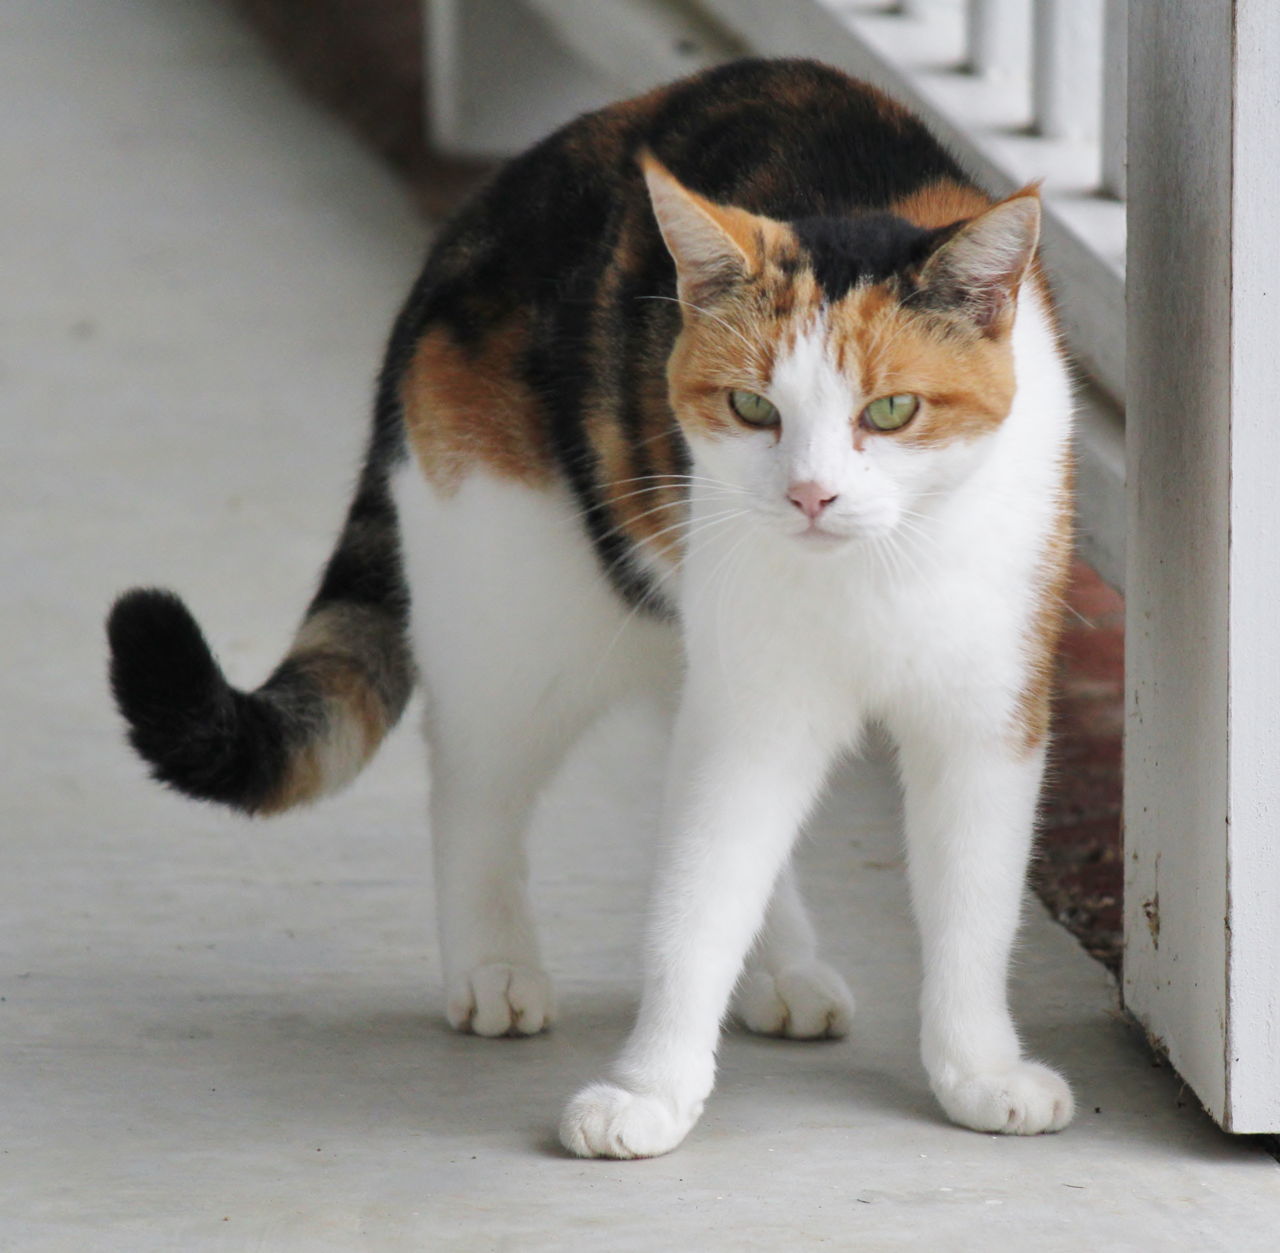 Awesome Facts About Calico Cats That are Sure to Blow Your Mind